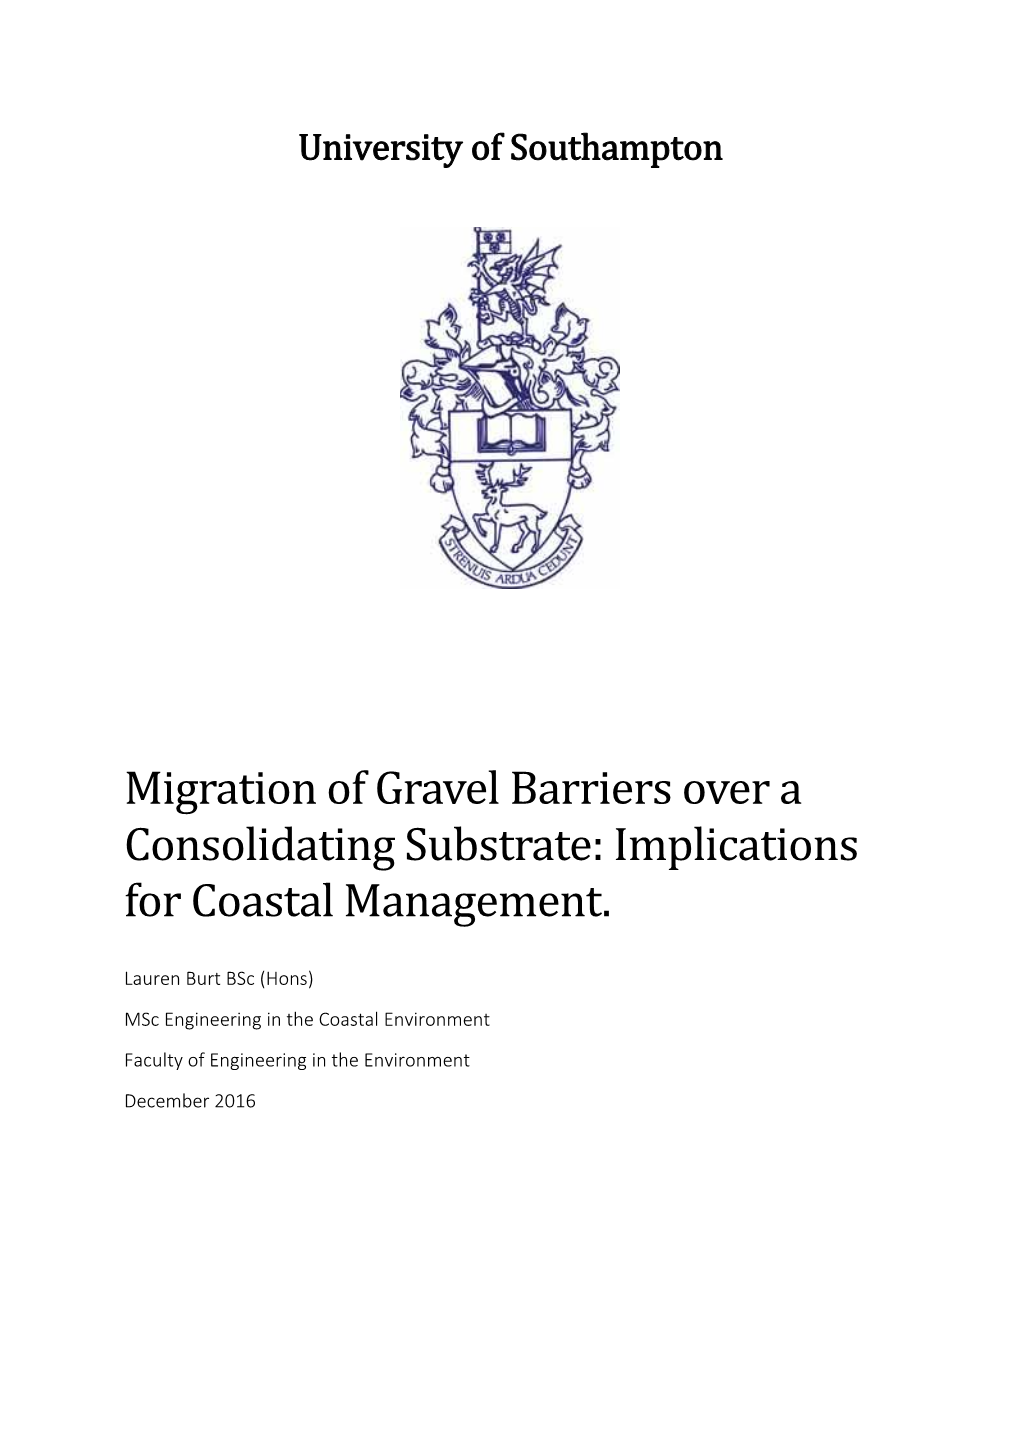 Migration of Gravel Barriers Over a Consolidating Substrate: Implications for Coastal Management